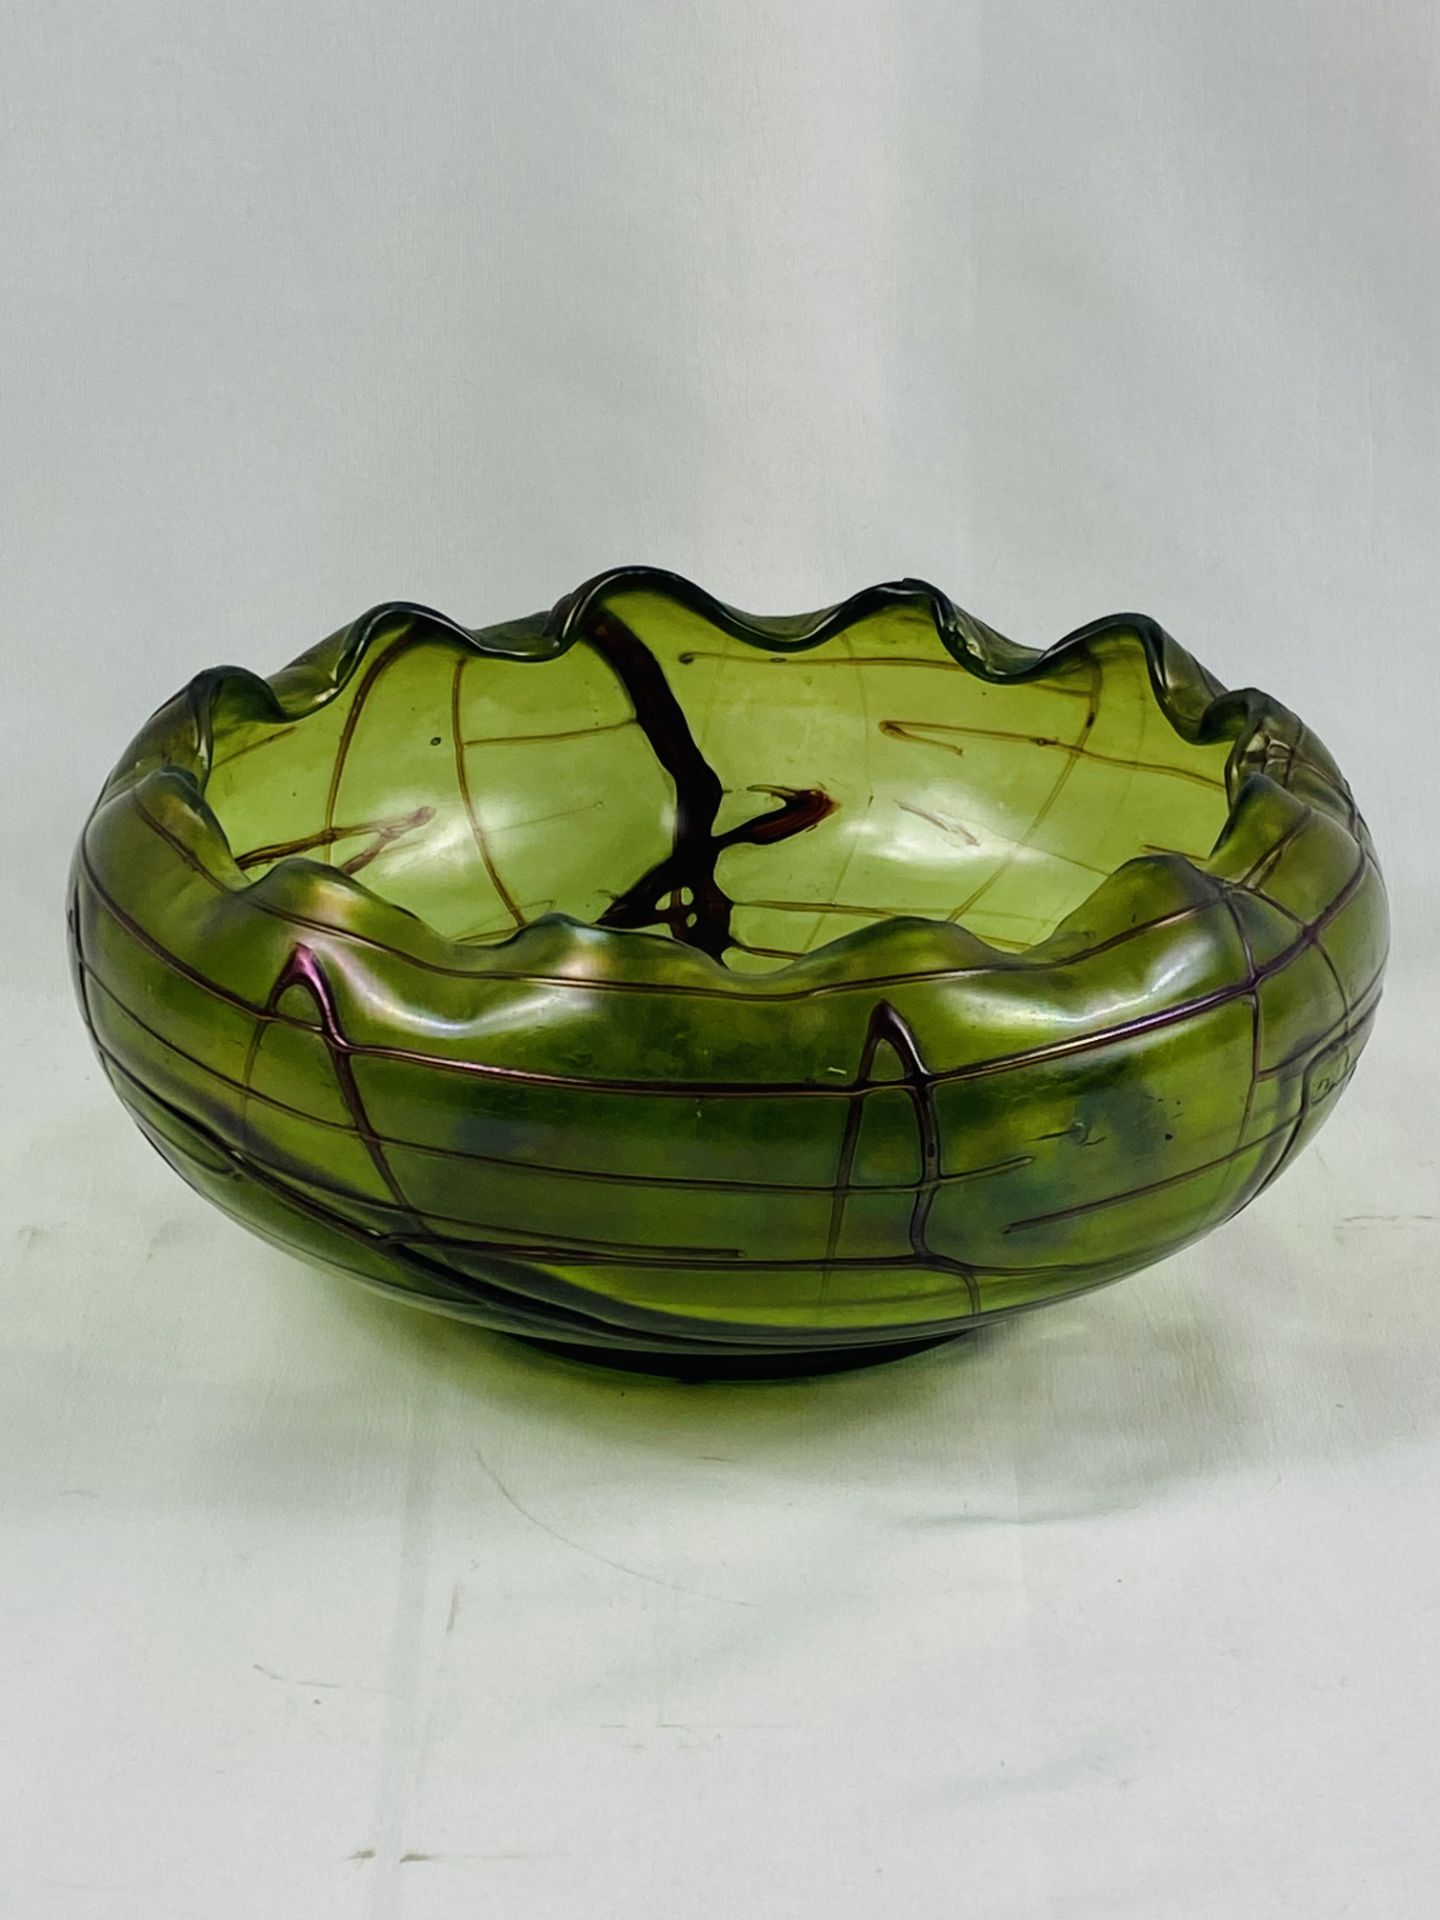 Green glass sgraffito style bowl with scalloped rim - Image 7 of 7